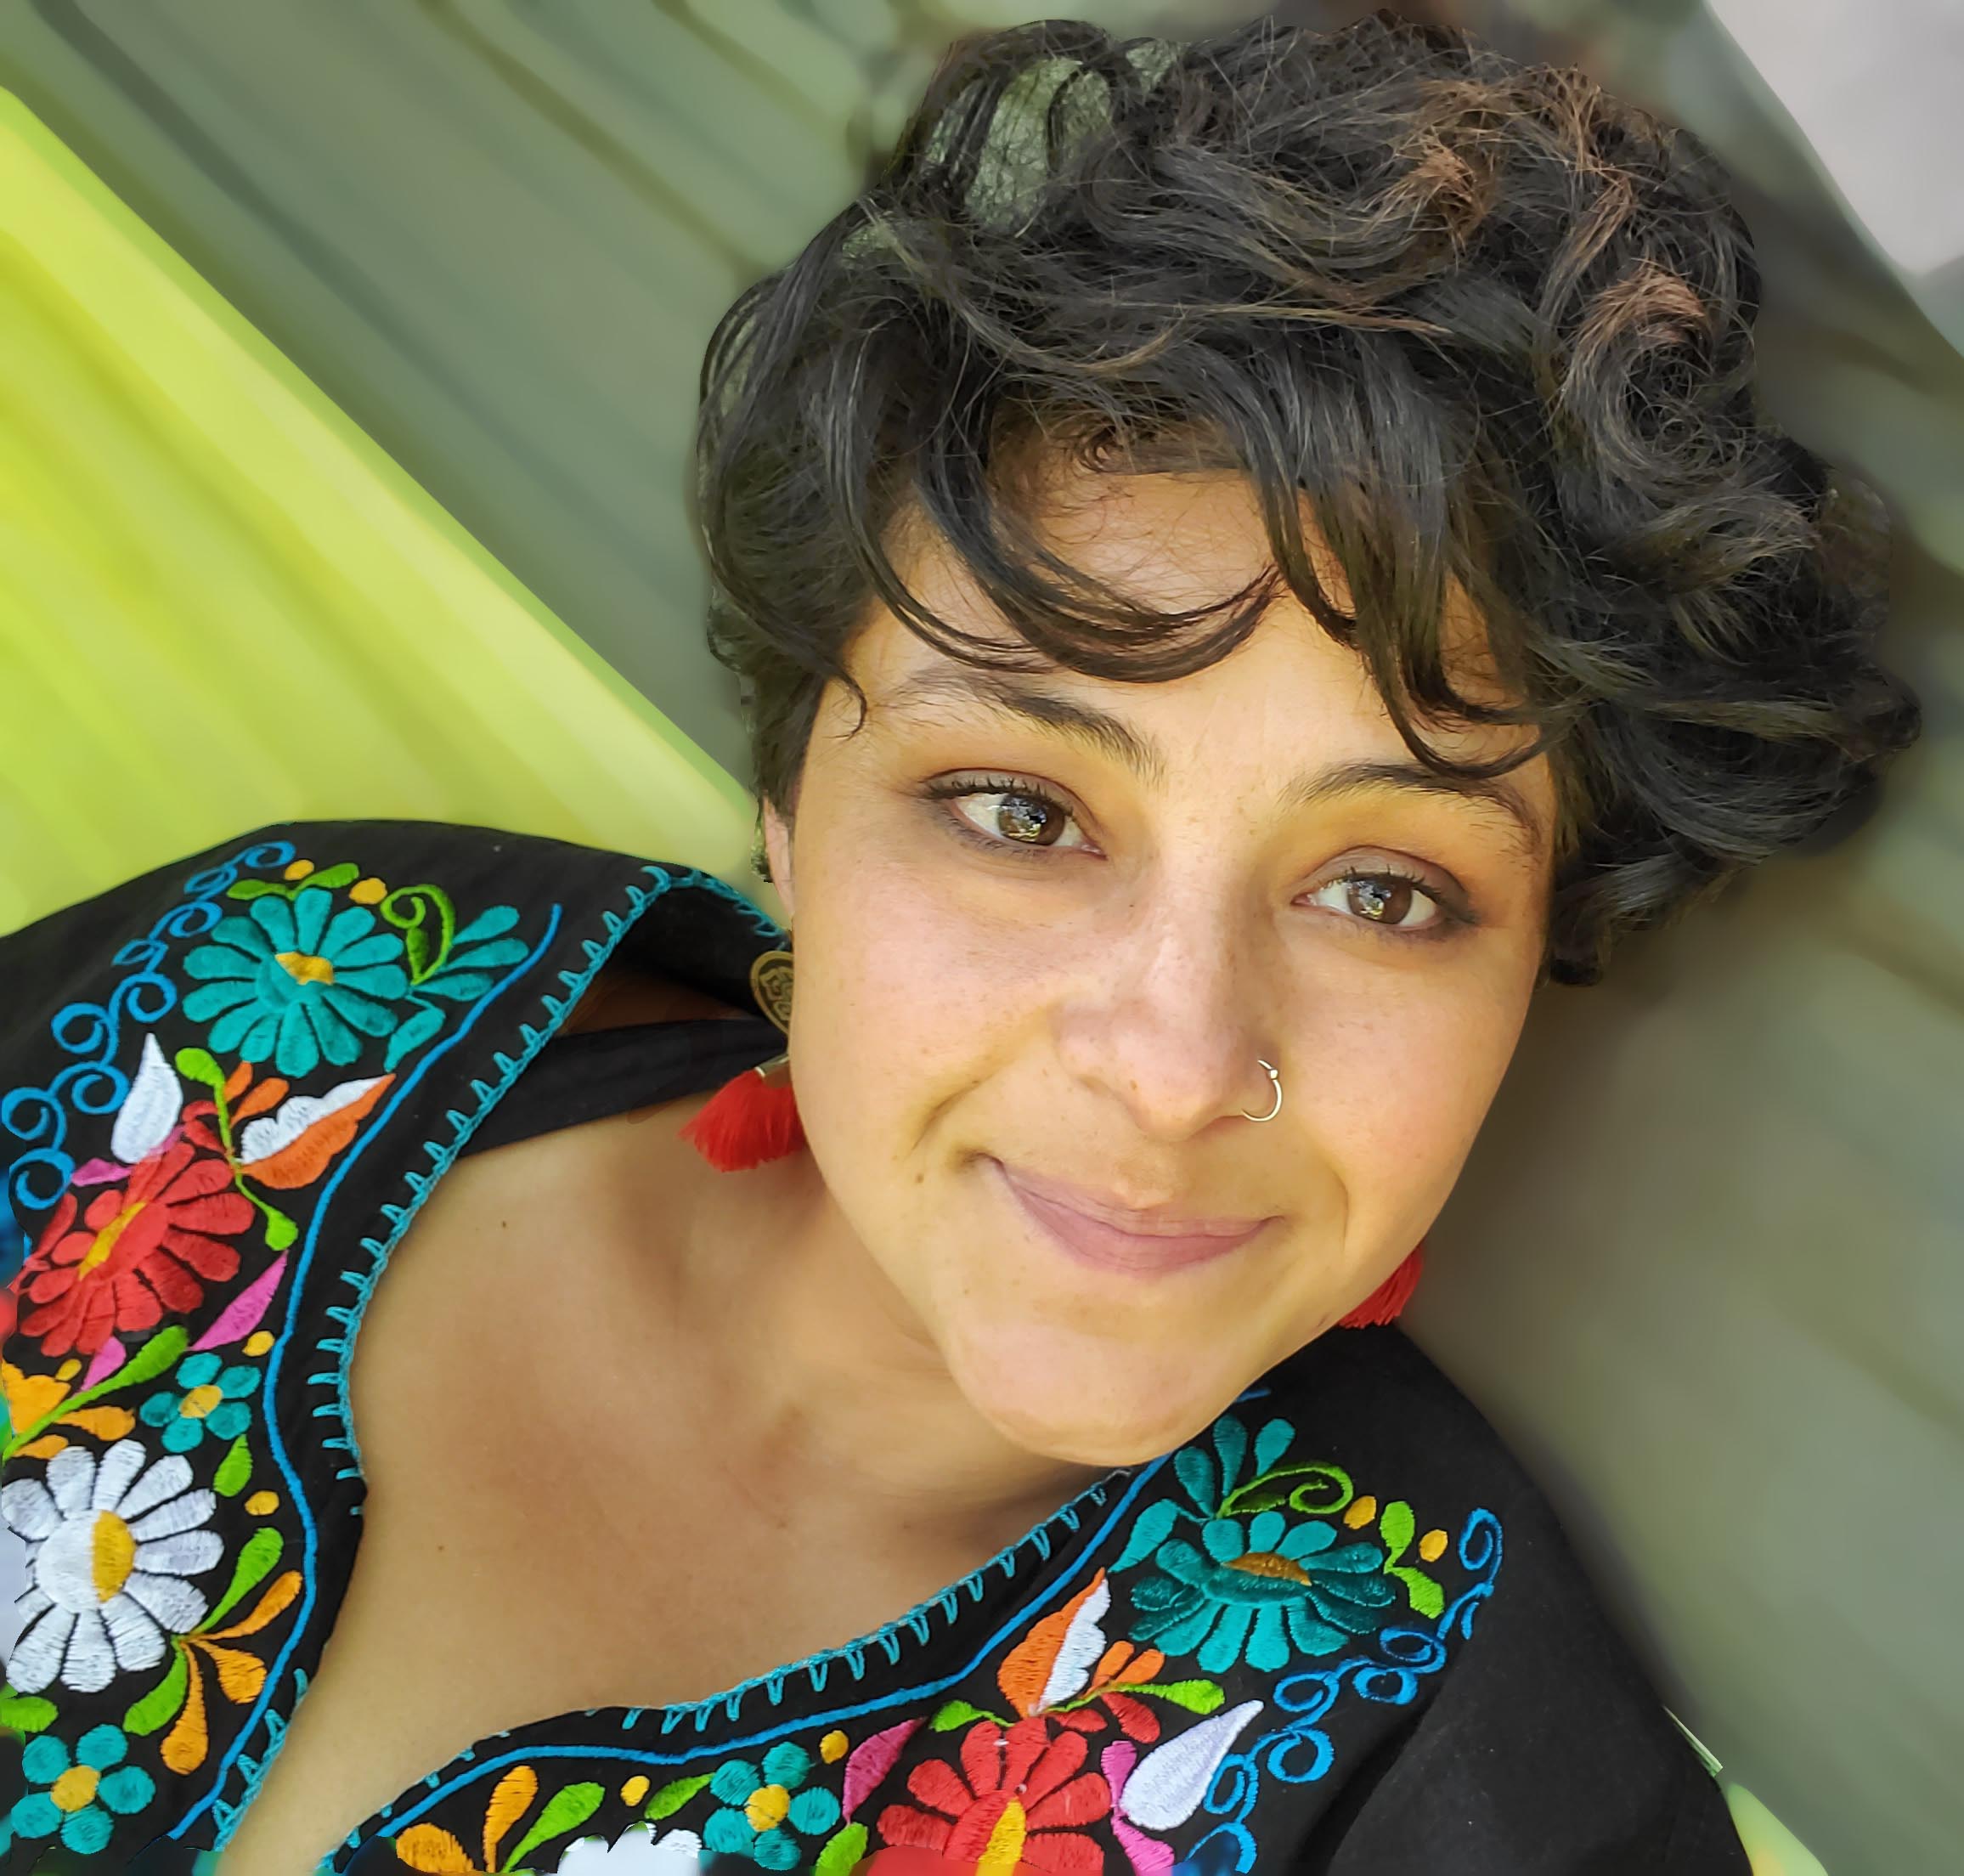 A woman with short curly hair, an embroidered floral dress, lays on a green background and smiles slightly at the camera.